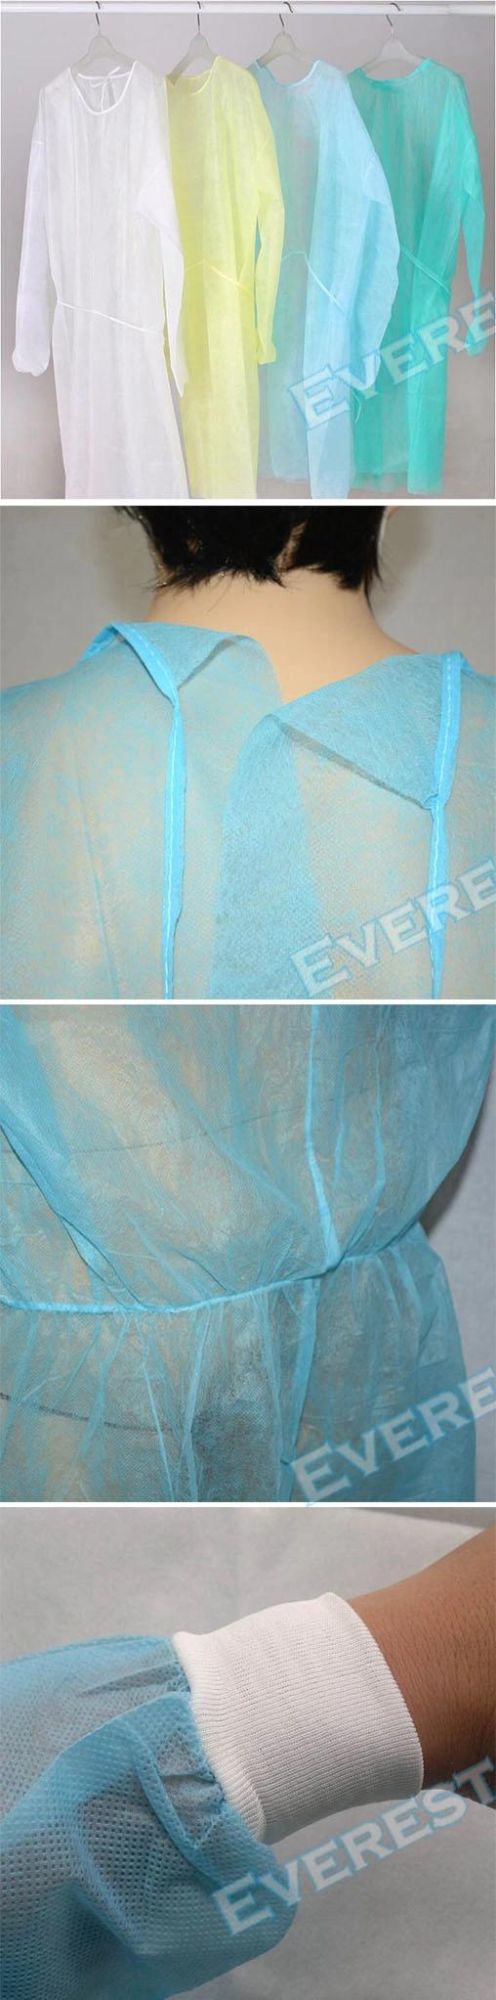 Nonwoven Polypropylene SBPP Disposable Visit Gown for Surgical Use